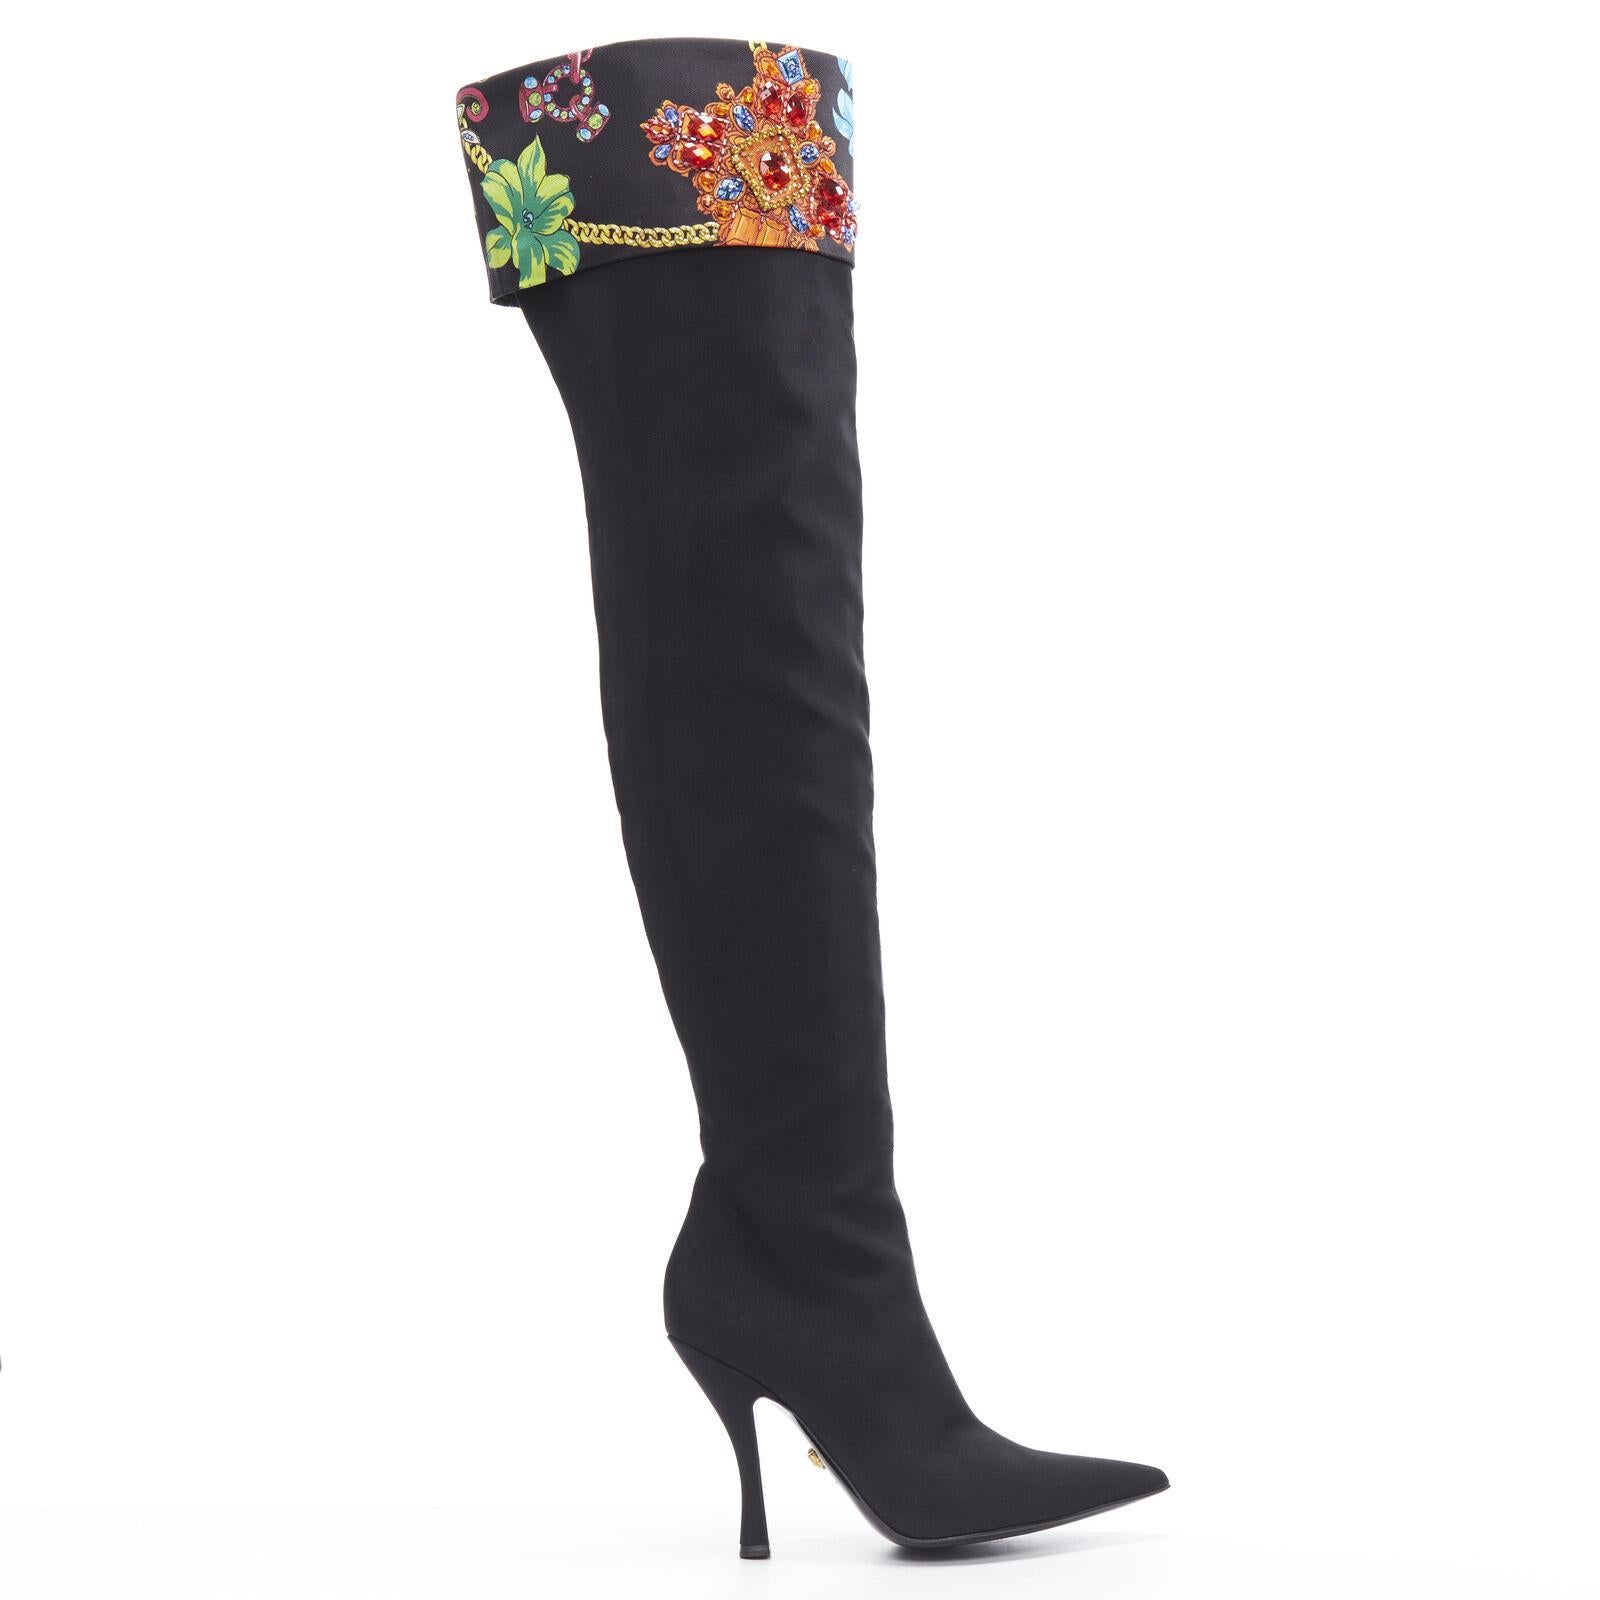 new VERSACE SS19 runway black chain crystal embellished foldover knee boot EU40
Brand: Versace
Designer: Donatella Versace
Collection: Spring Summer 2019 Look #48
Model Name / Style: Over the knee boots
Material: Fabric
Color: Black
Pattern: Solid;